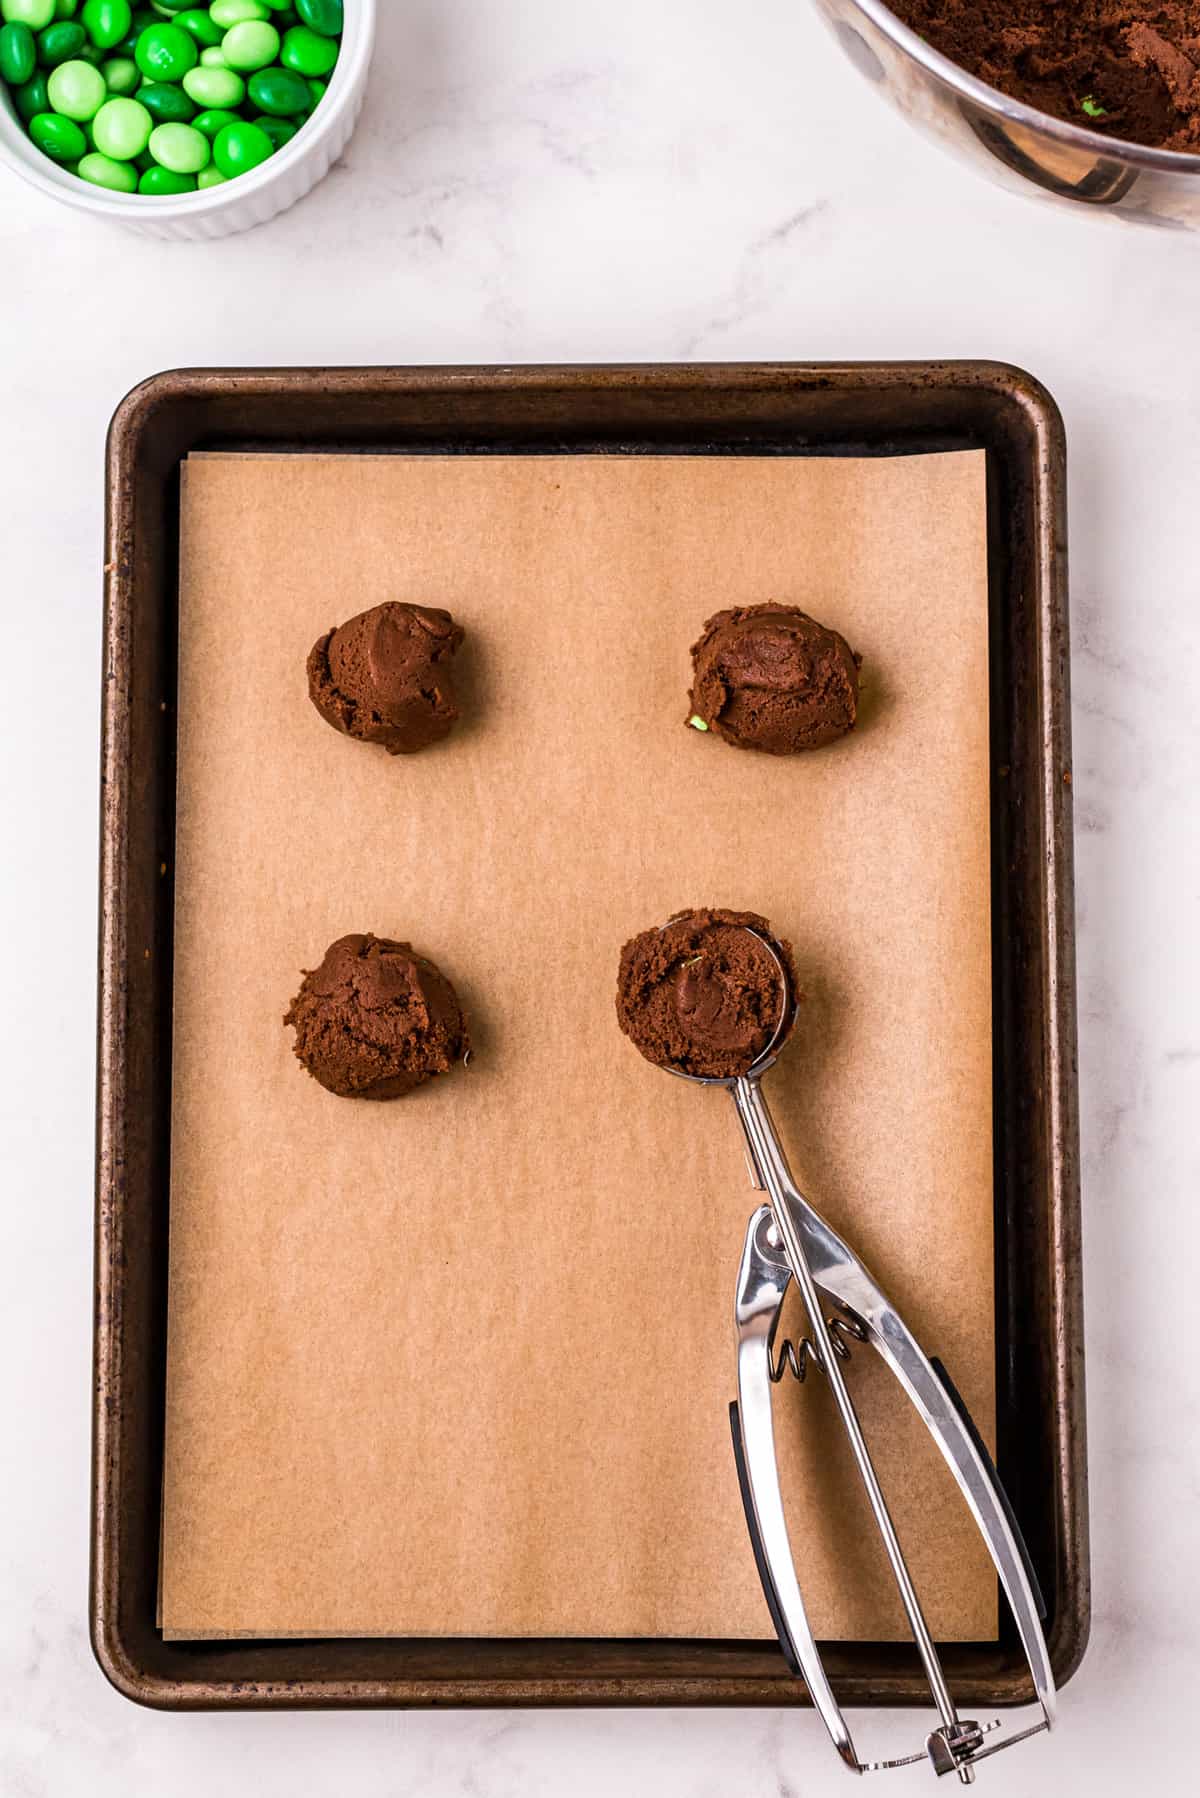 Form 1 tablespoon size balls and place them onto at baking sheet lined with parchment paper.